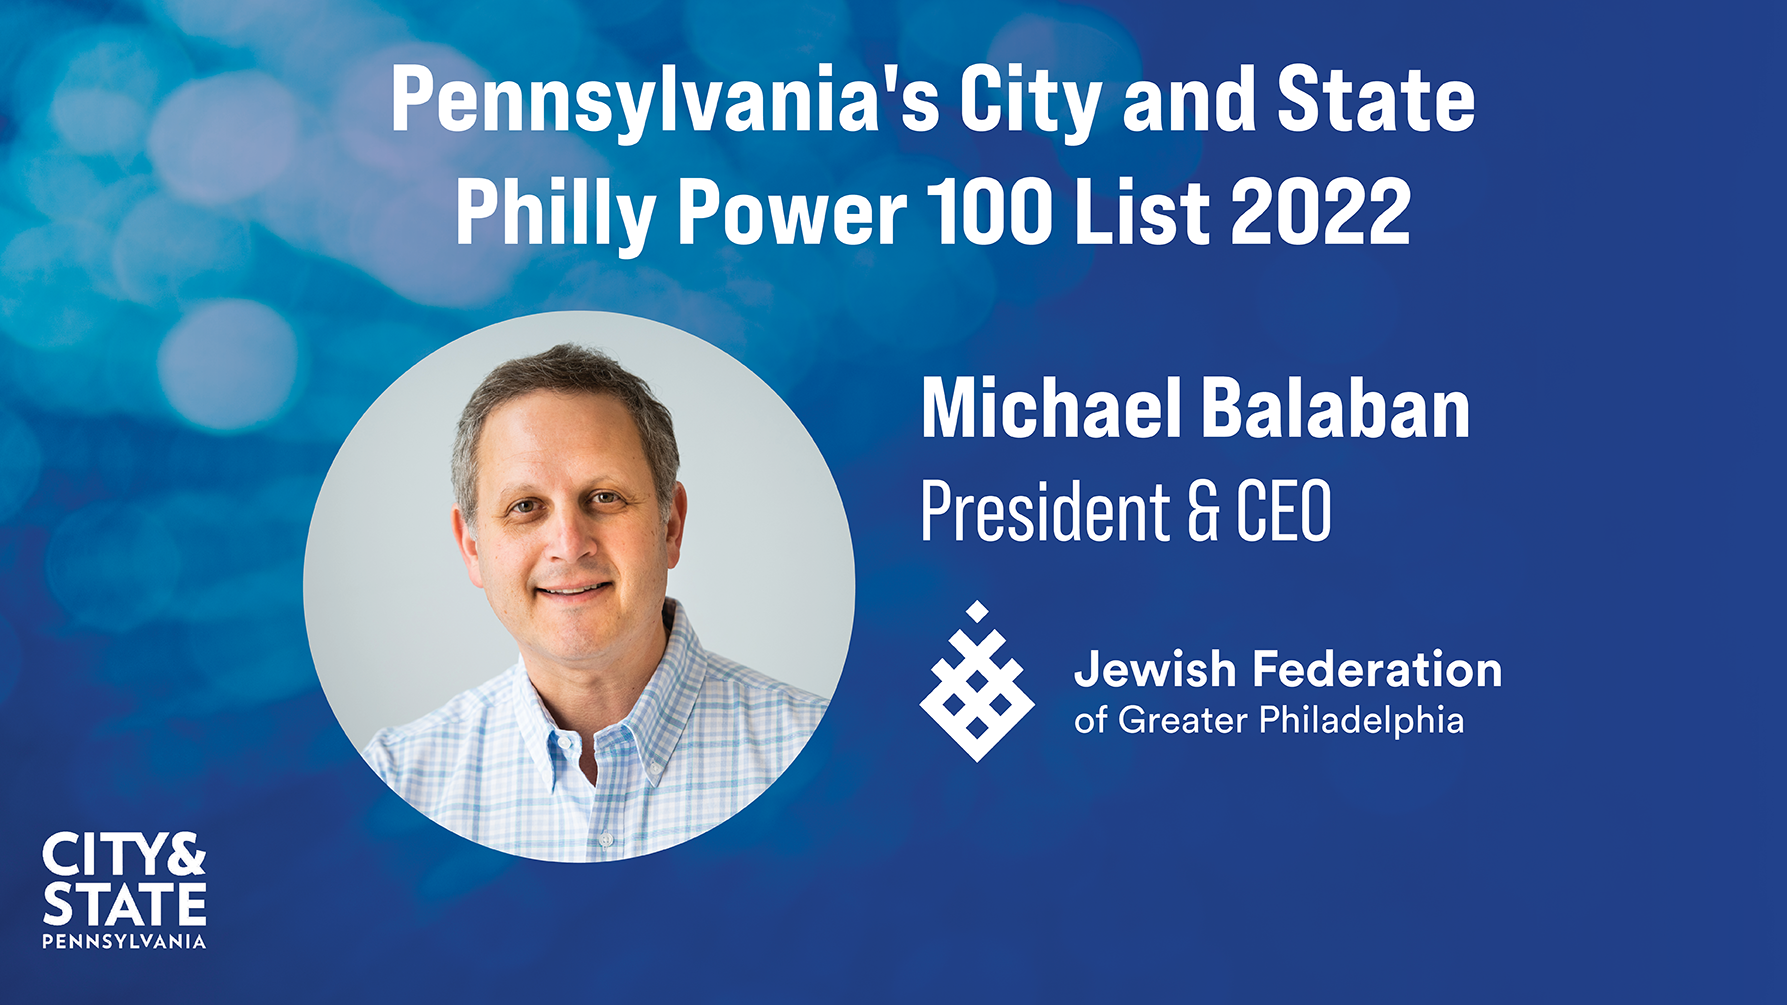 Jewish Federation Makes City & State PA 's Philly Power 100 List